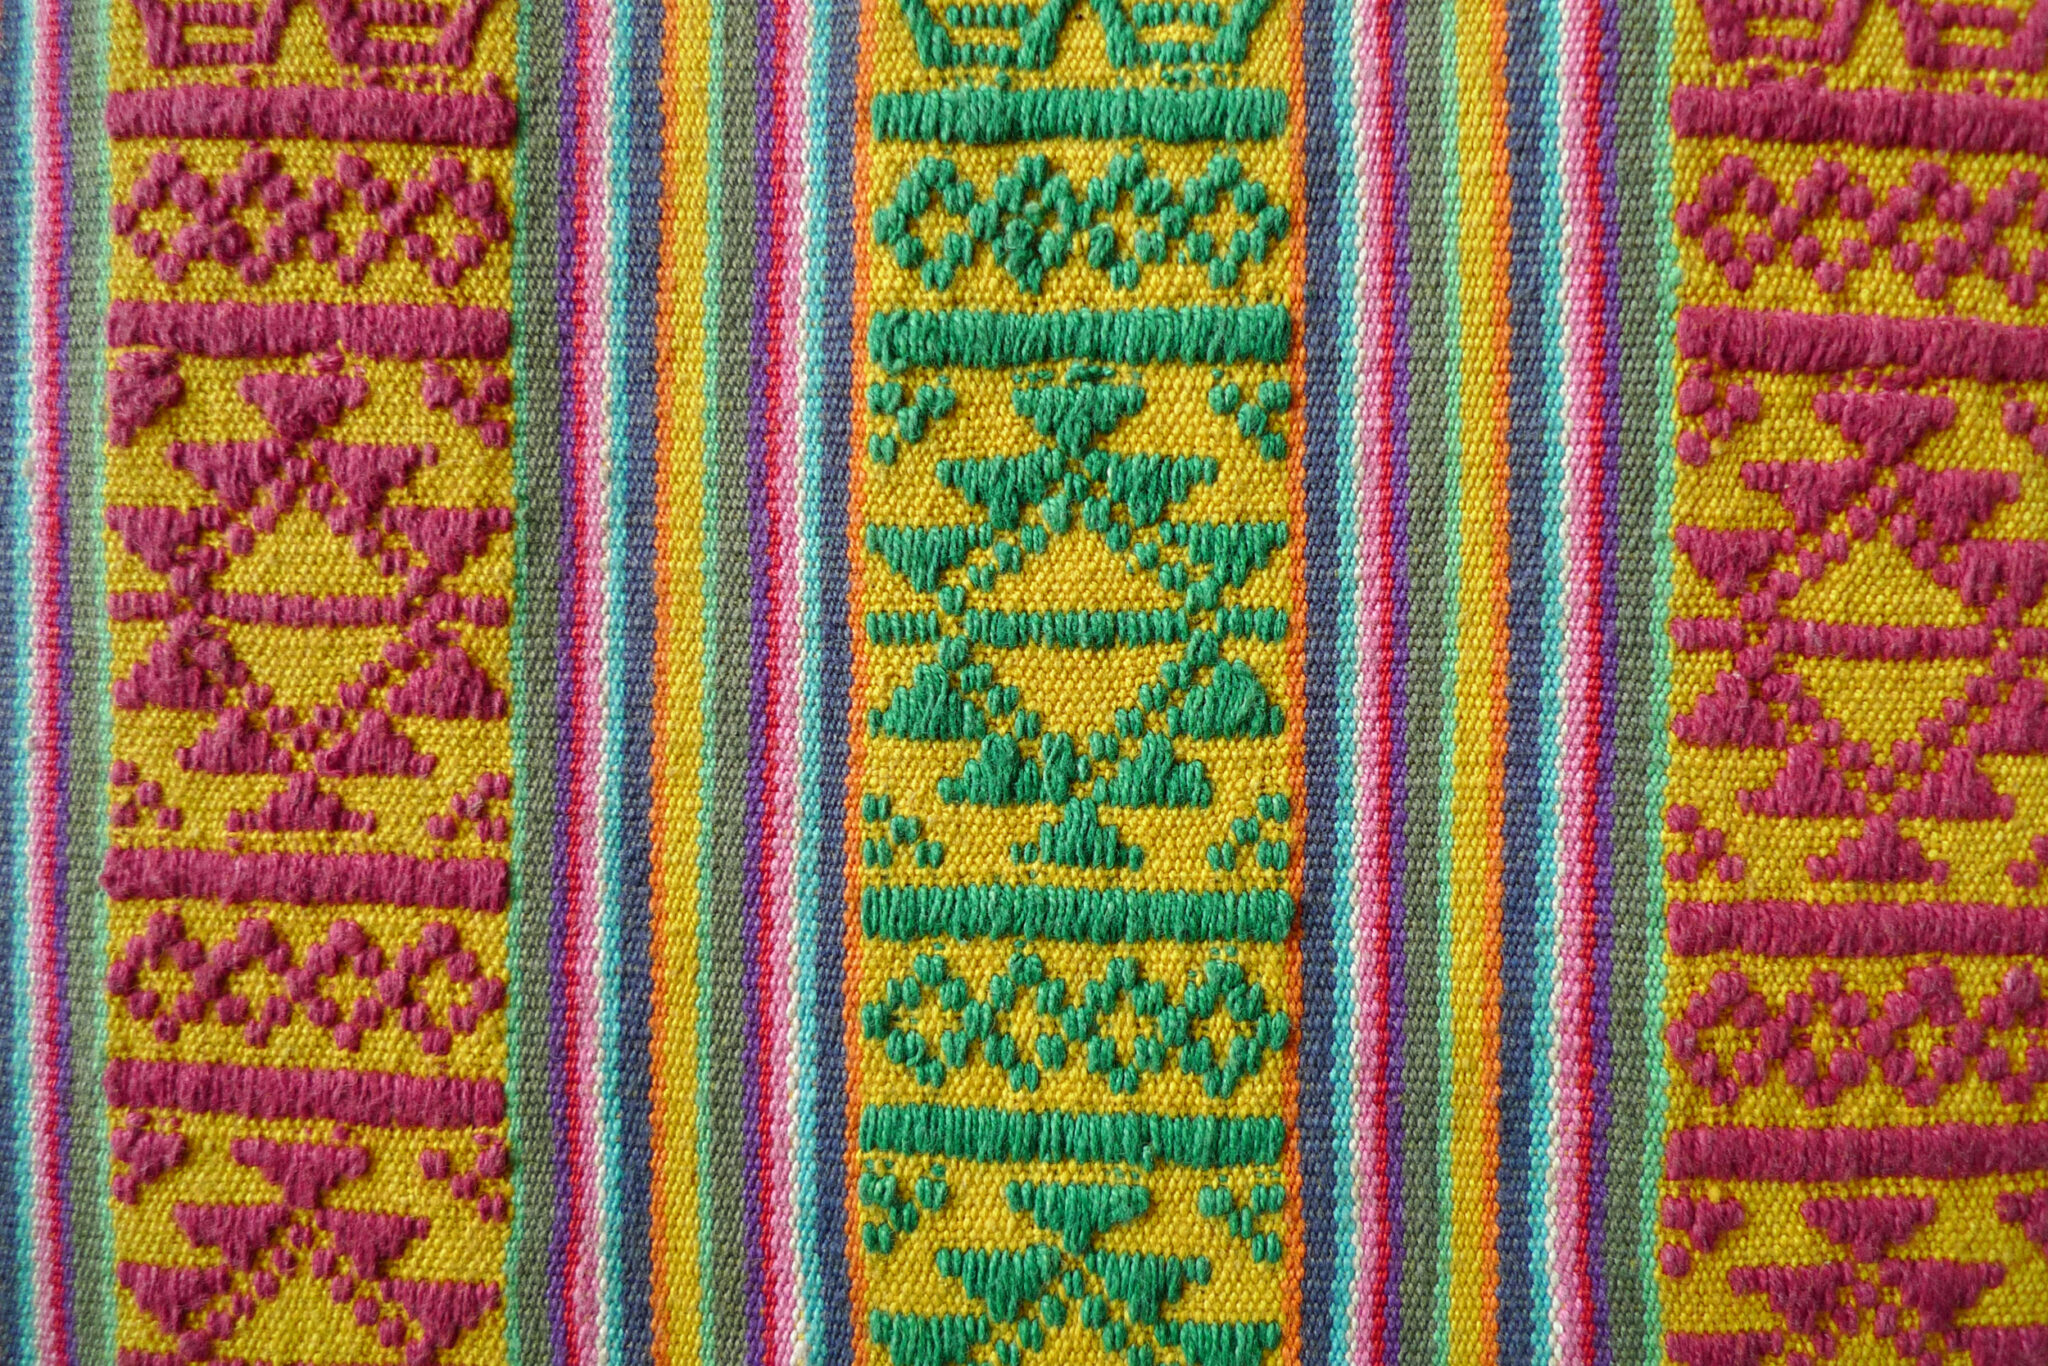 Detail of textile featuring vertical bands woven with geometrical patterns in yellow, green, red, and pink